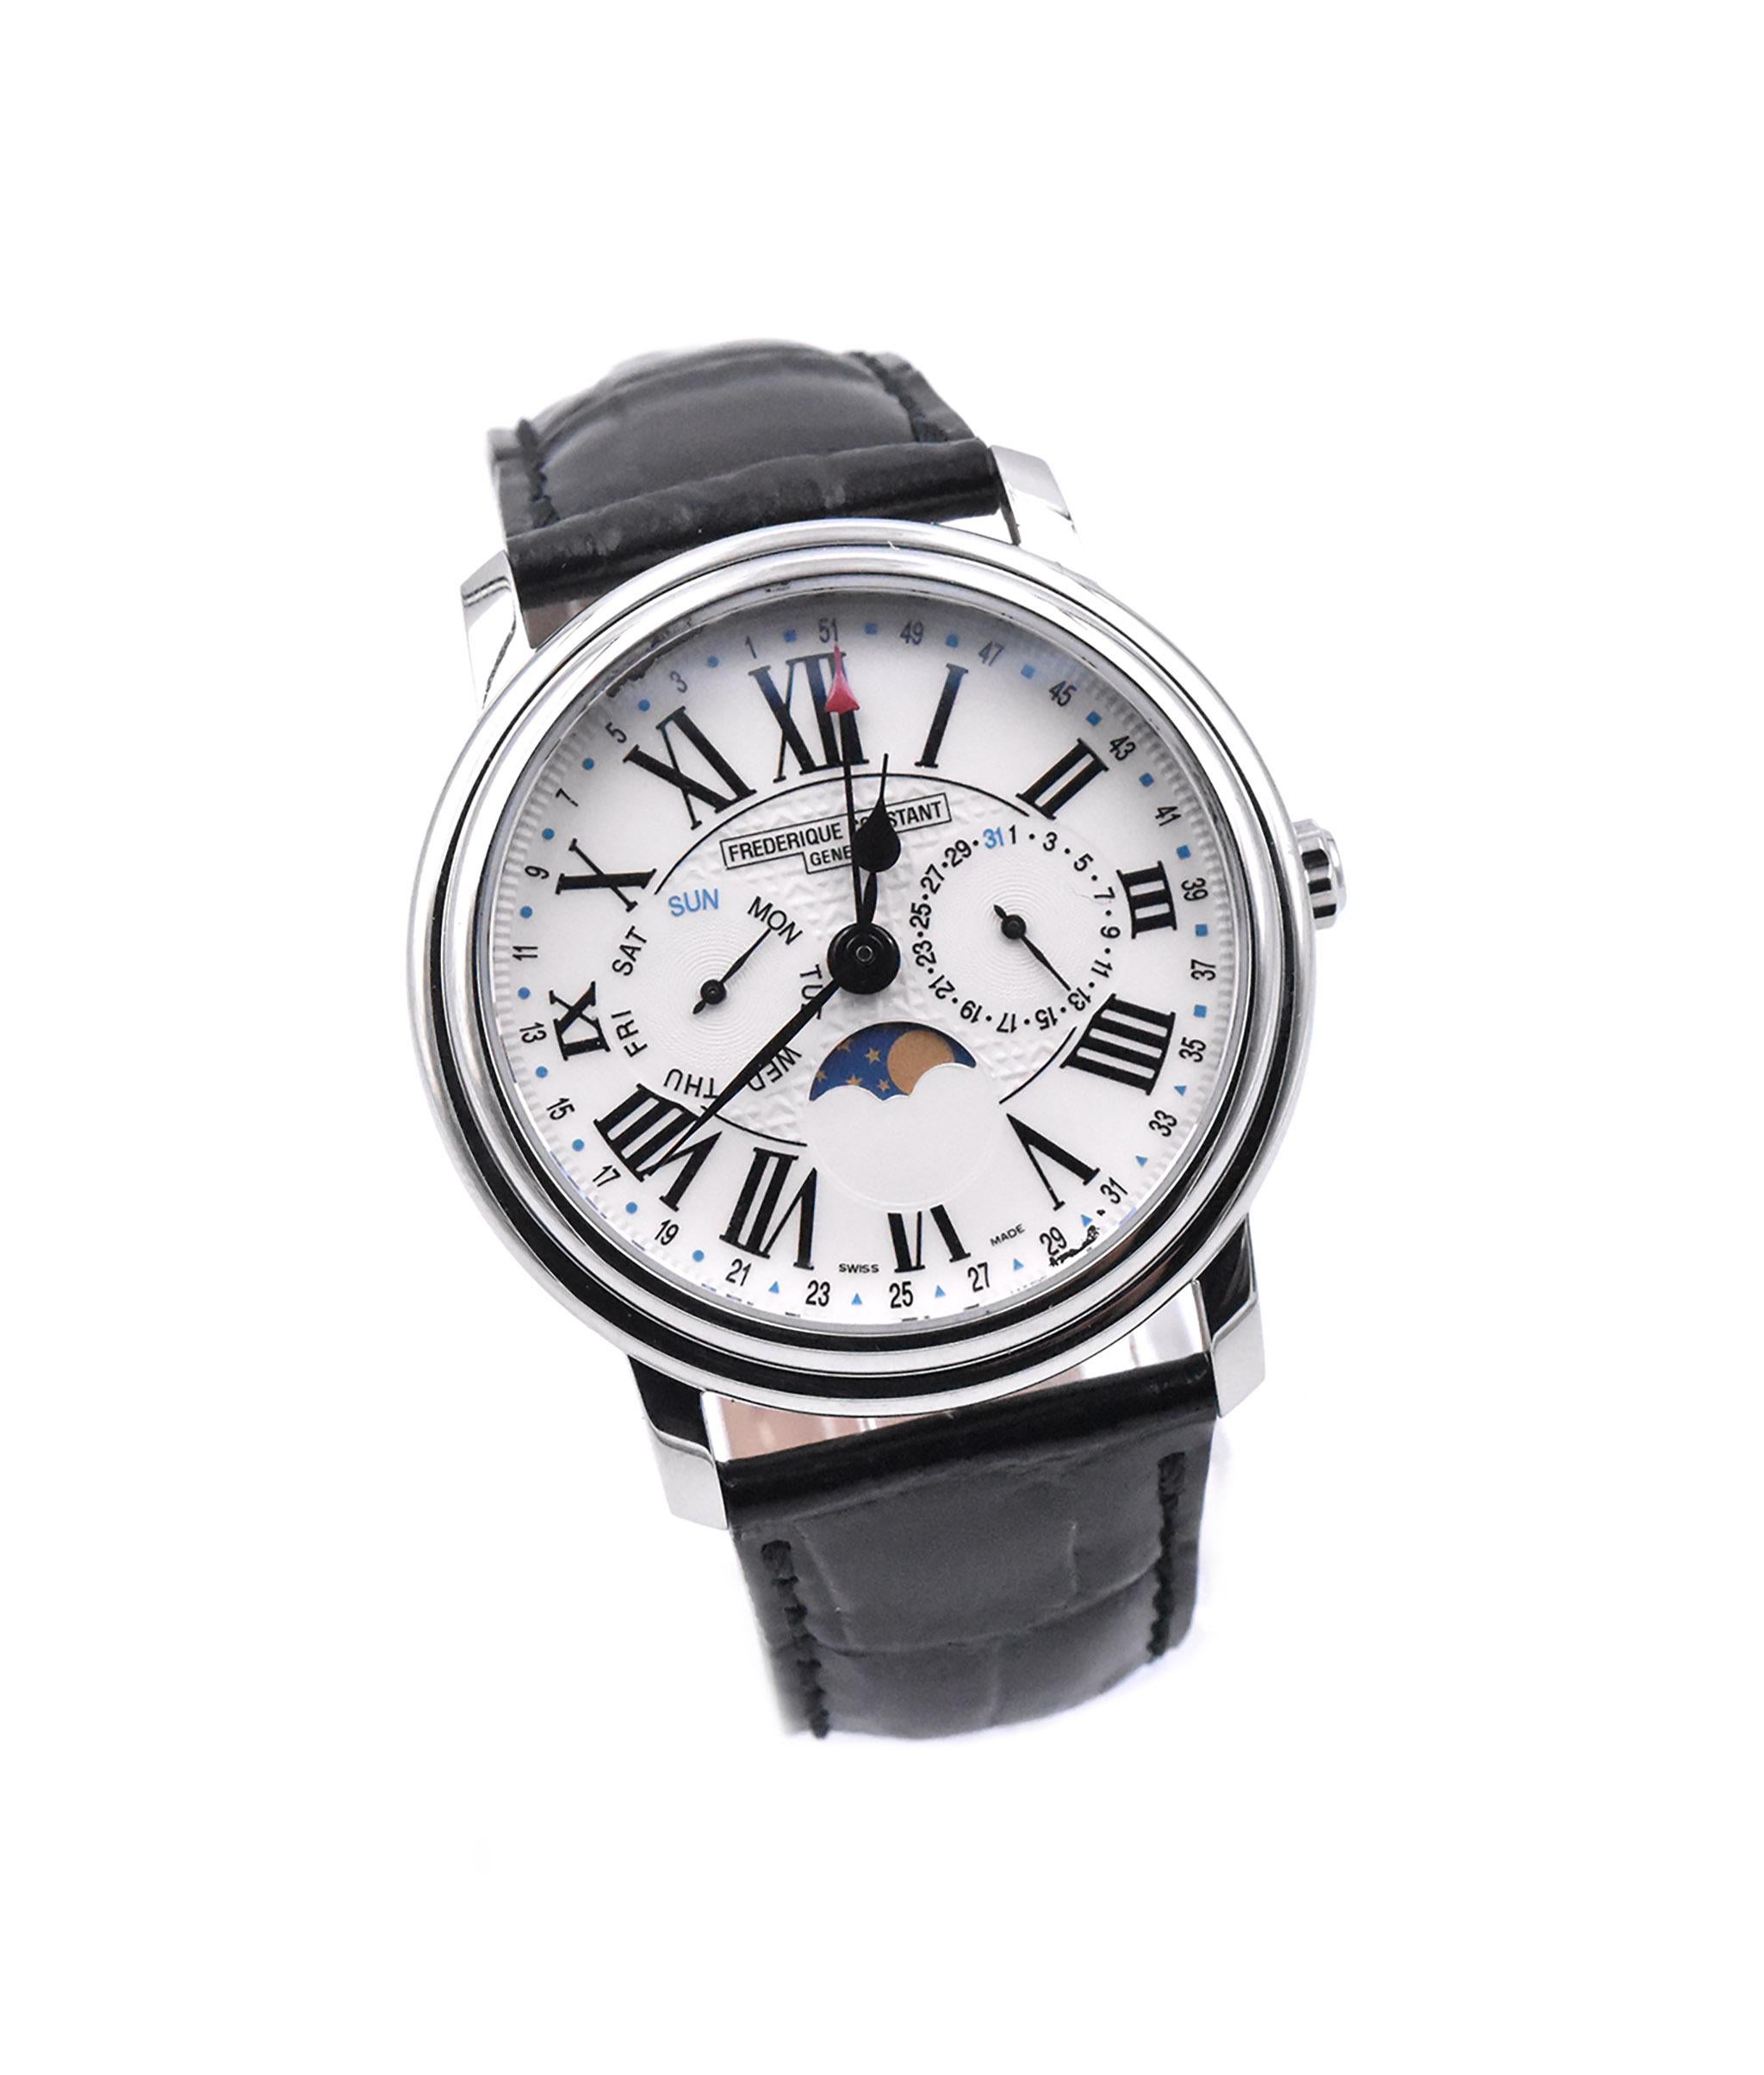 Movement: automatic
Function: hours, minutes, seconds, moonphase, calendar, week indicator
Case: 40mm stainless steel round casing
Bracelet: black leather strap
Dial: white dial, black roman numerals
Reference #: FC-270X4p4/5/6
Serial # 3664XXX

Box